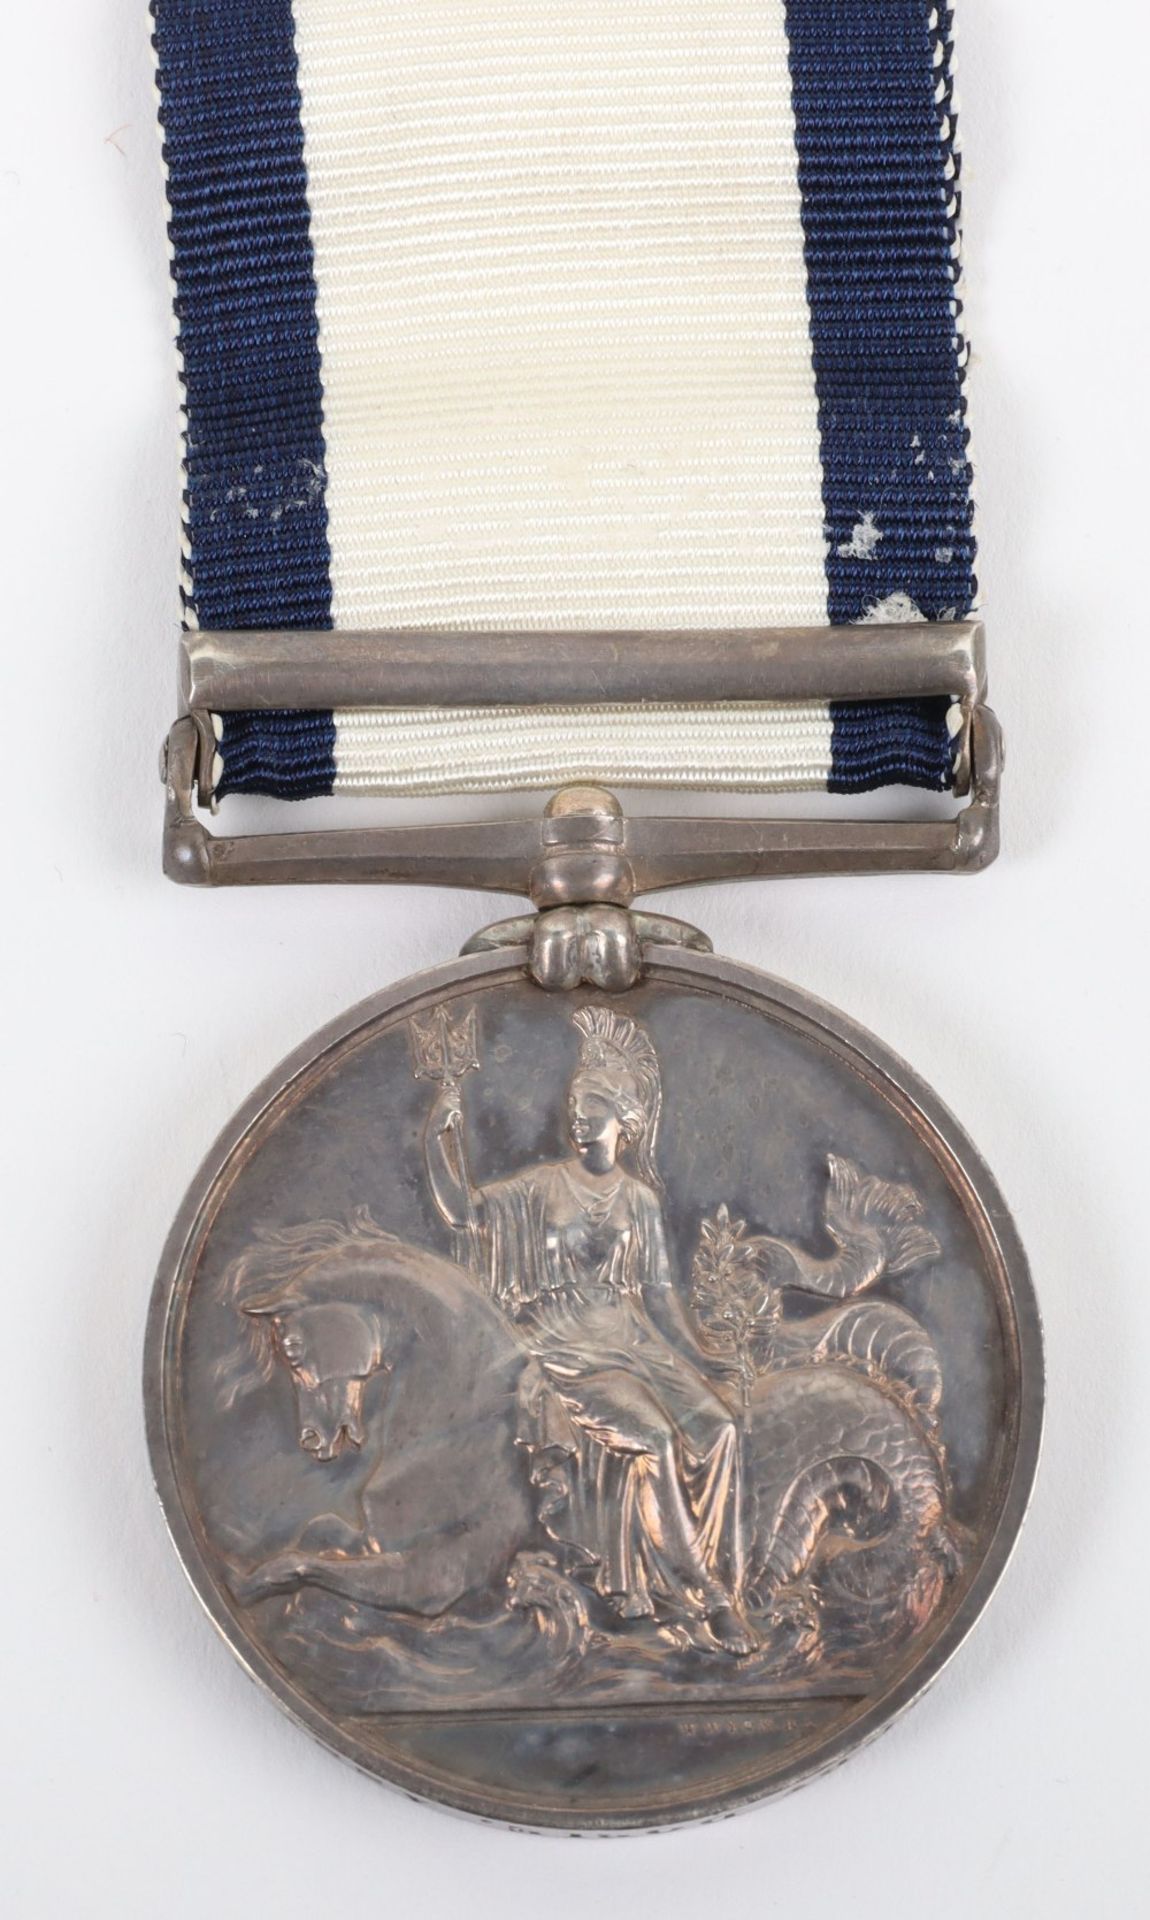 Naval General Service Medal 1793-1840 Awarded to Assistant Surgeon Robert Dobie for the Action on th - Image 3 of 3